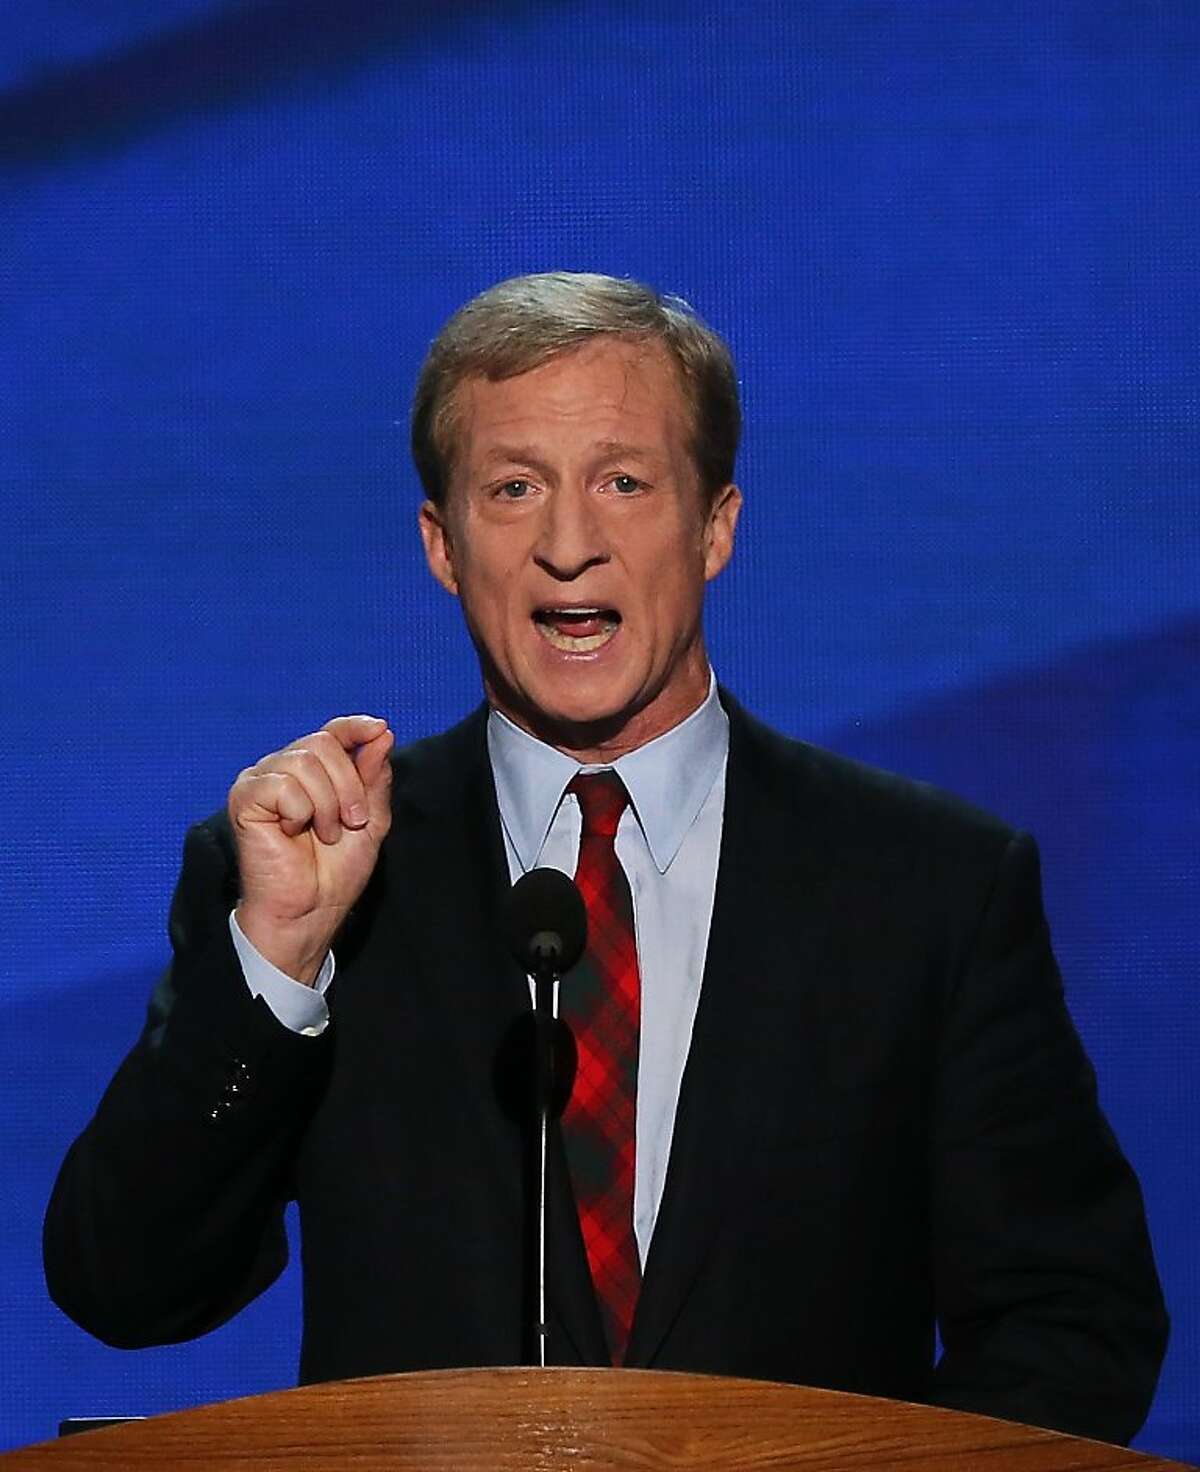 CHARLOTTE, NC - SEPTEMBER 05: Co-Founder of Advanced Energy Economy Tom Steyer speaks during day two of the Democratic National Convention at Time Warner Cable Arena on September 5, 2012 in Charlotte, North Carolina. The DNC that will run through September 7, will nominate U.S. President Barack Obama as the Democratic presidential candidate. (Photo by Alex Wong/Getty Images)